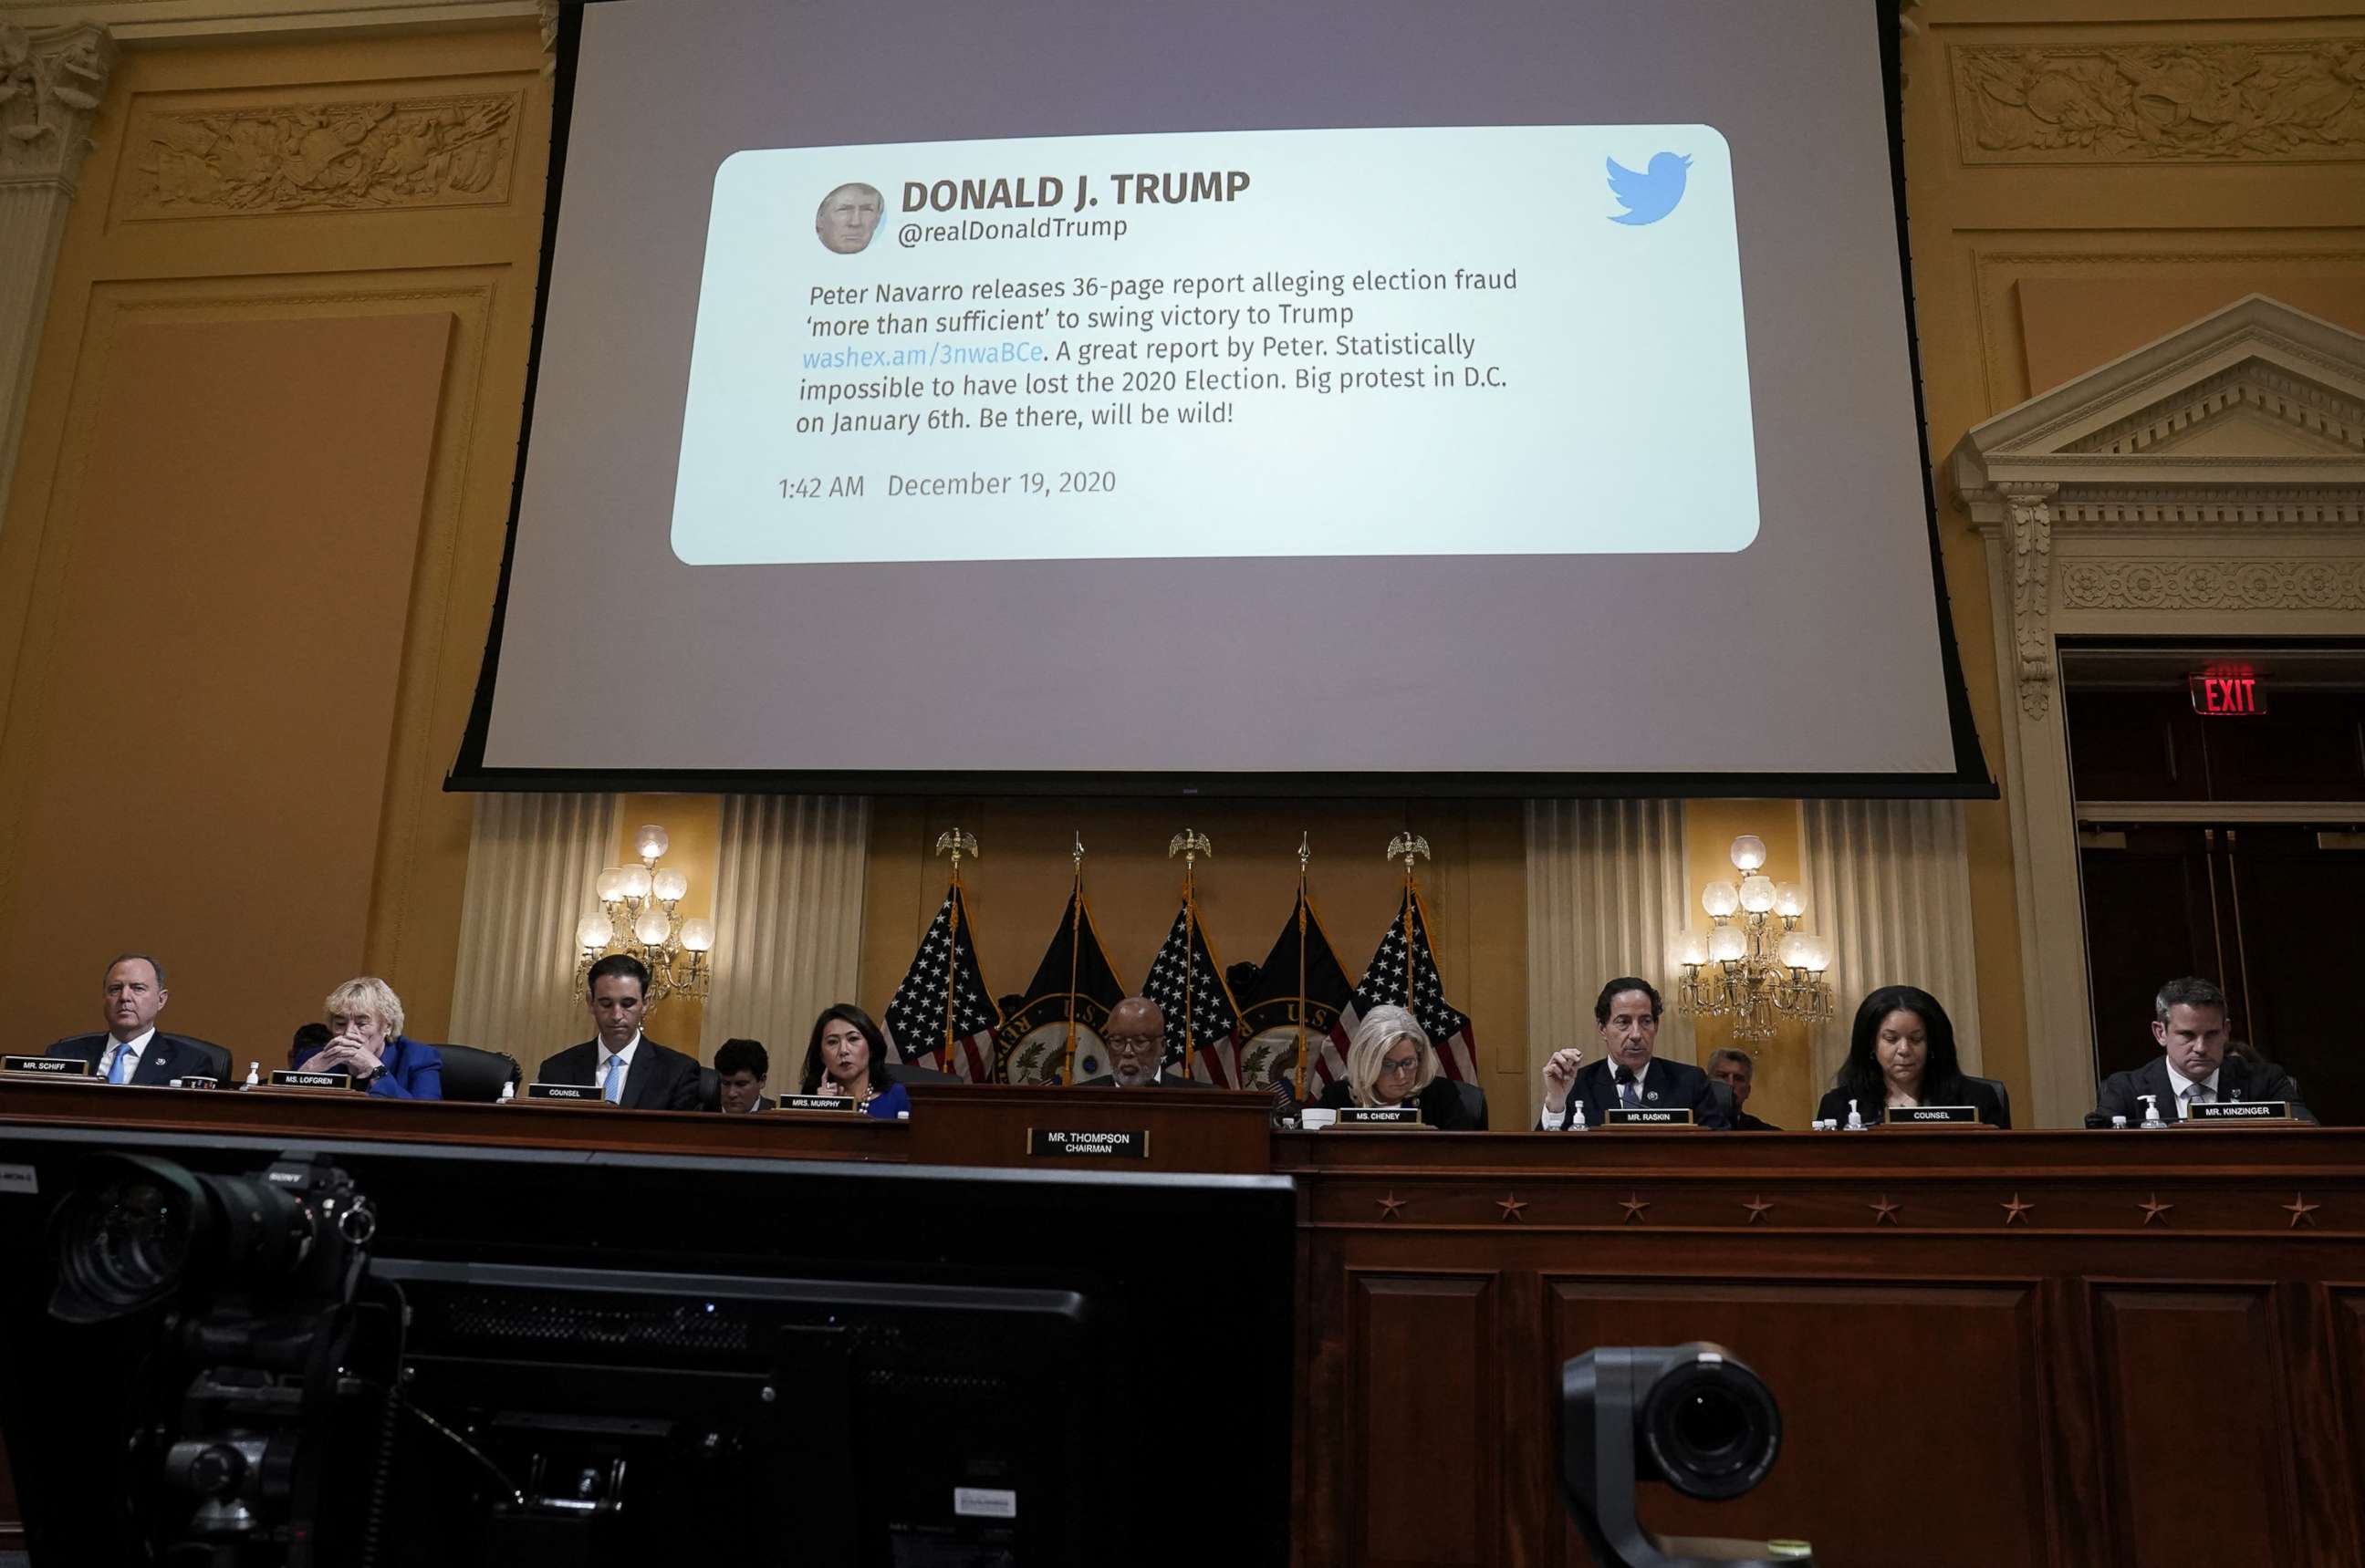 PHOTO: Former U.S President Donald Trump's tweet is shown on the screen during a public hearing of the U.S. House Select Committee to investigate the January 6 Attack on the U.S. Capitol, on Capitol Hill, July 12, 2022.